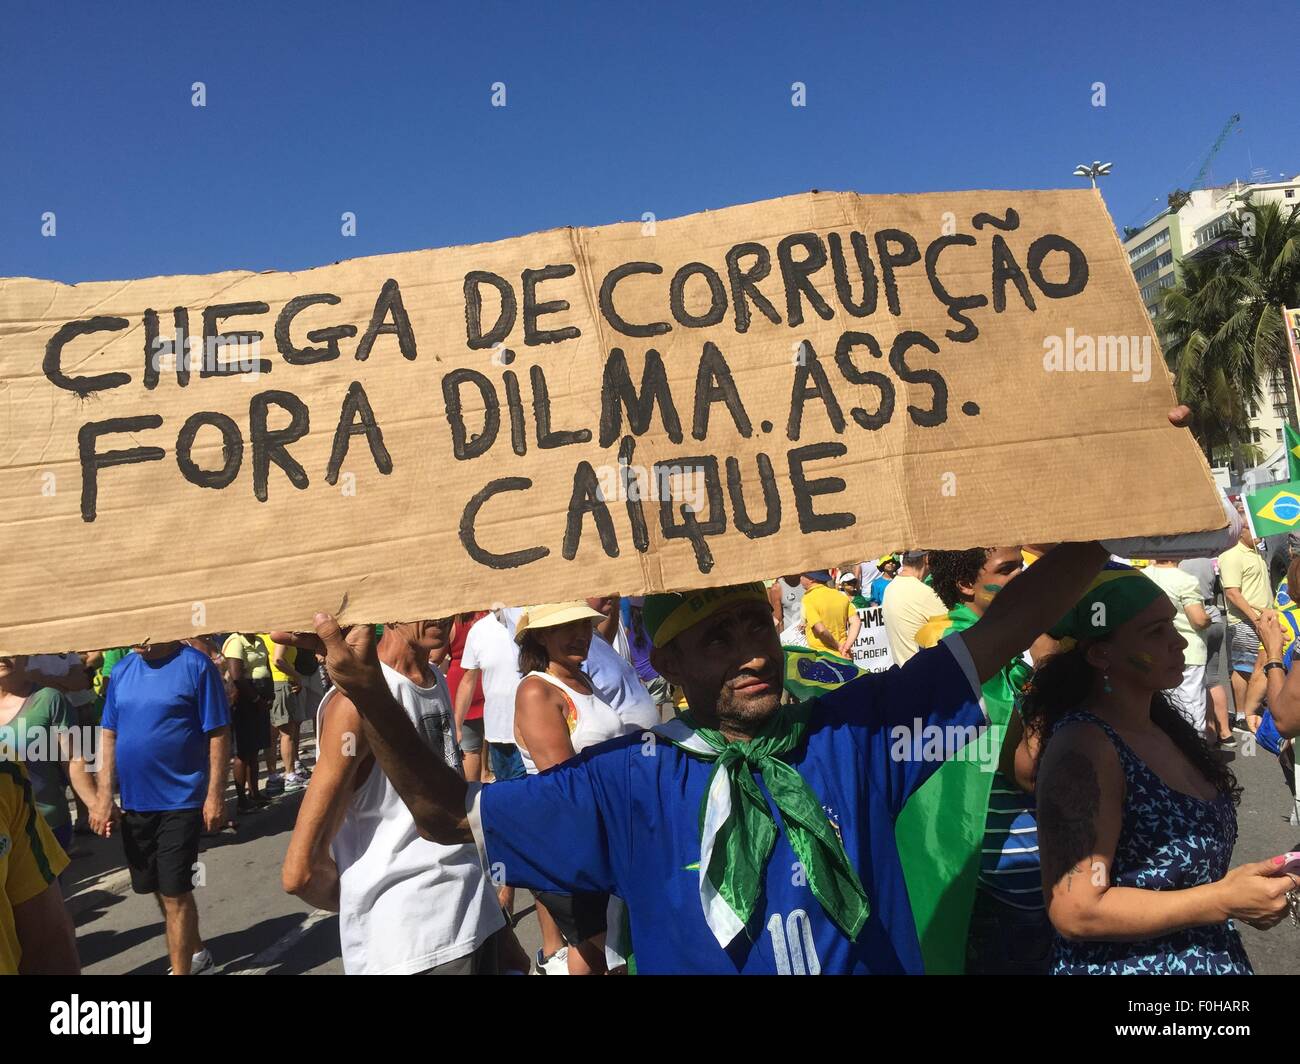 A protestor against president Rousseff holds a placard that reads 'No more corruption - Dilma out' at a demonstration in Rio de Janeiro, Brazil, 16 August 2015. Many Brazilians are calling for Rousseff's resignation due to an extensive corruption scandal. PHOTO: GEORG ISMAR Stock Photo